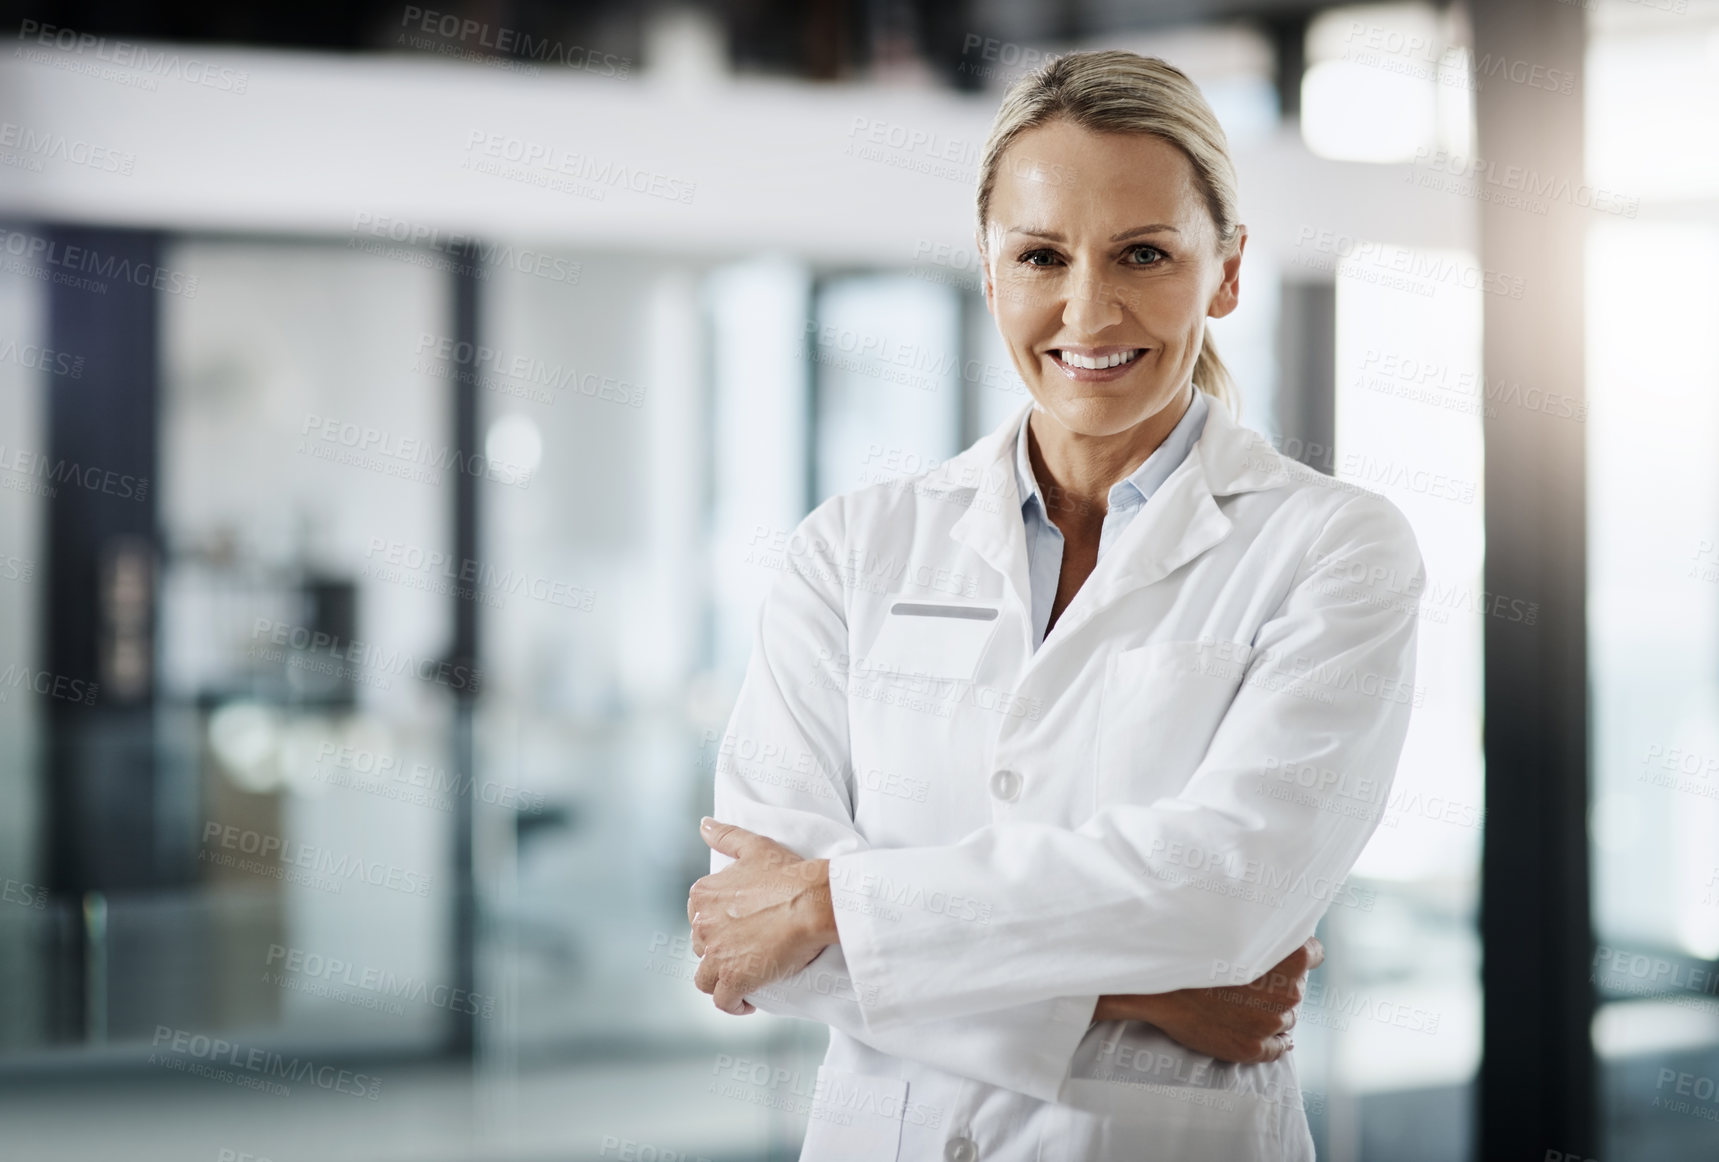 Buy stock photo Cropped portrait of an attractive mature female scientist standing with her arms folded in her lab